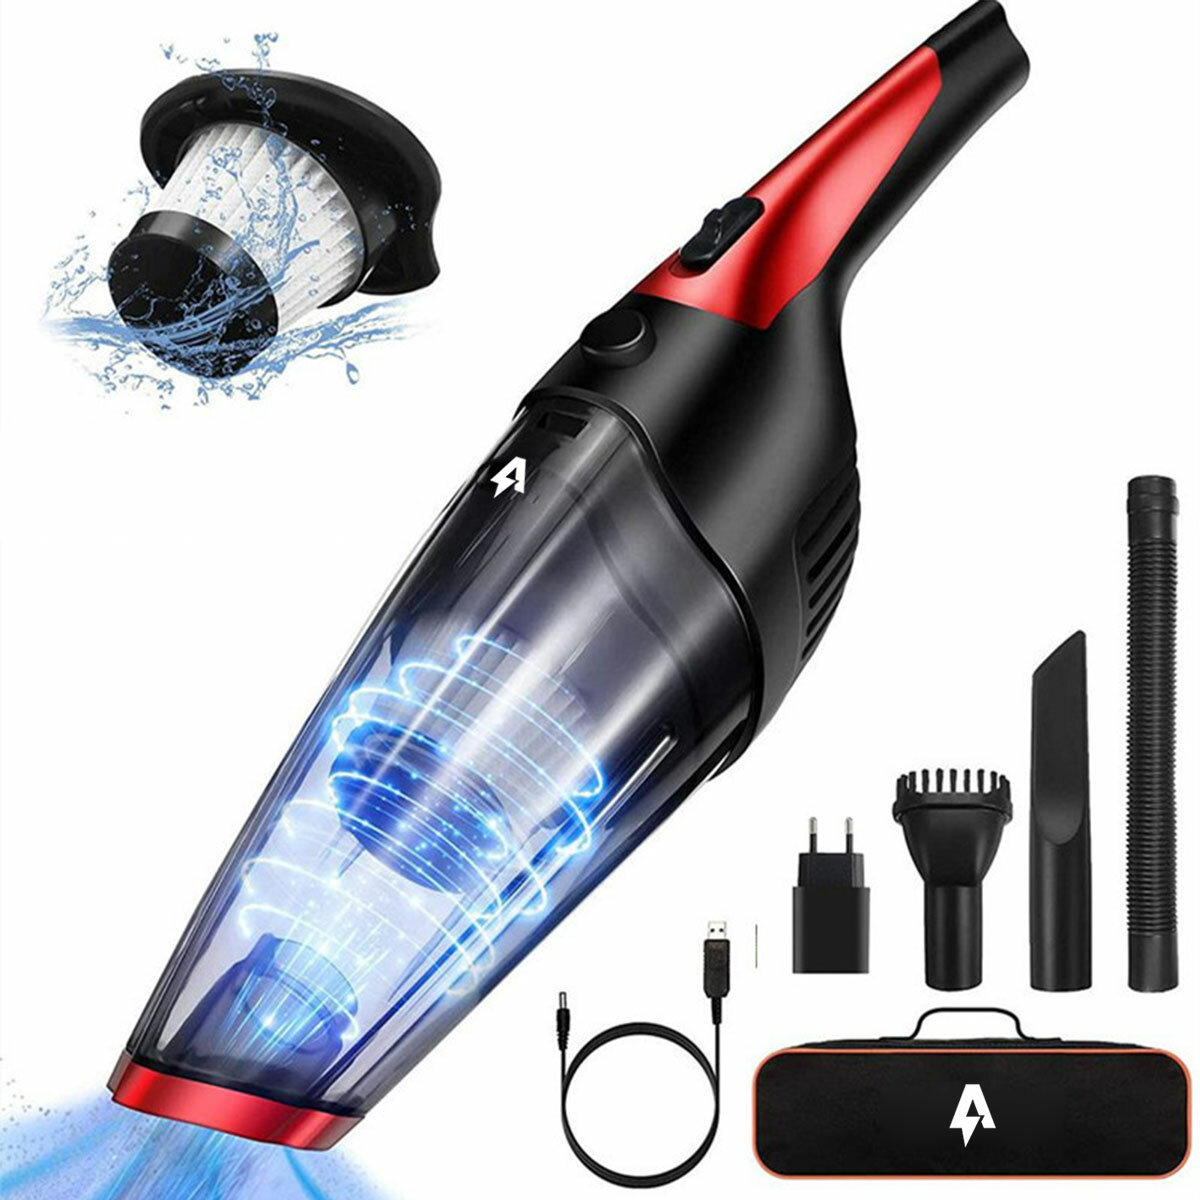 Audew 7000Pa Wireless Handheld Car Cleaning Vacuum Cleaner Filter Washable Low Noise...